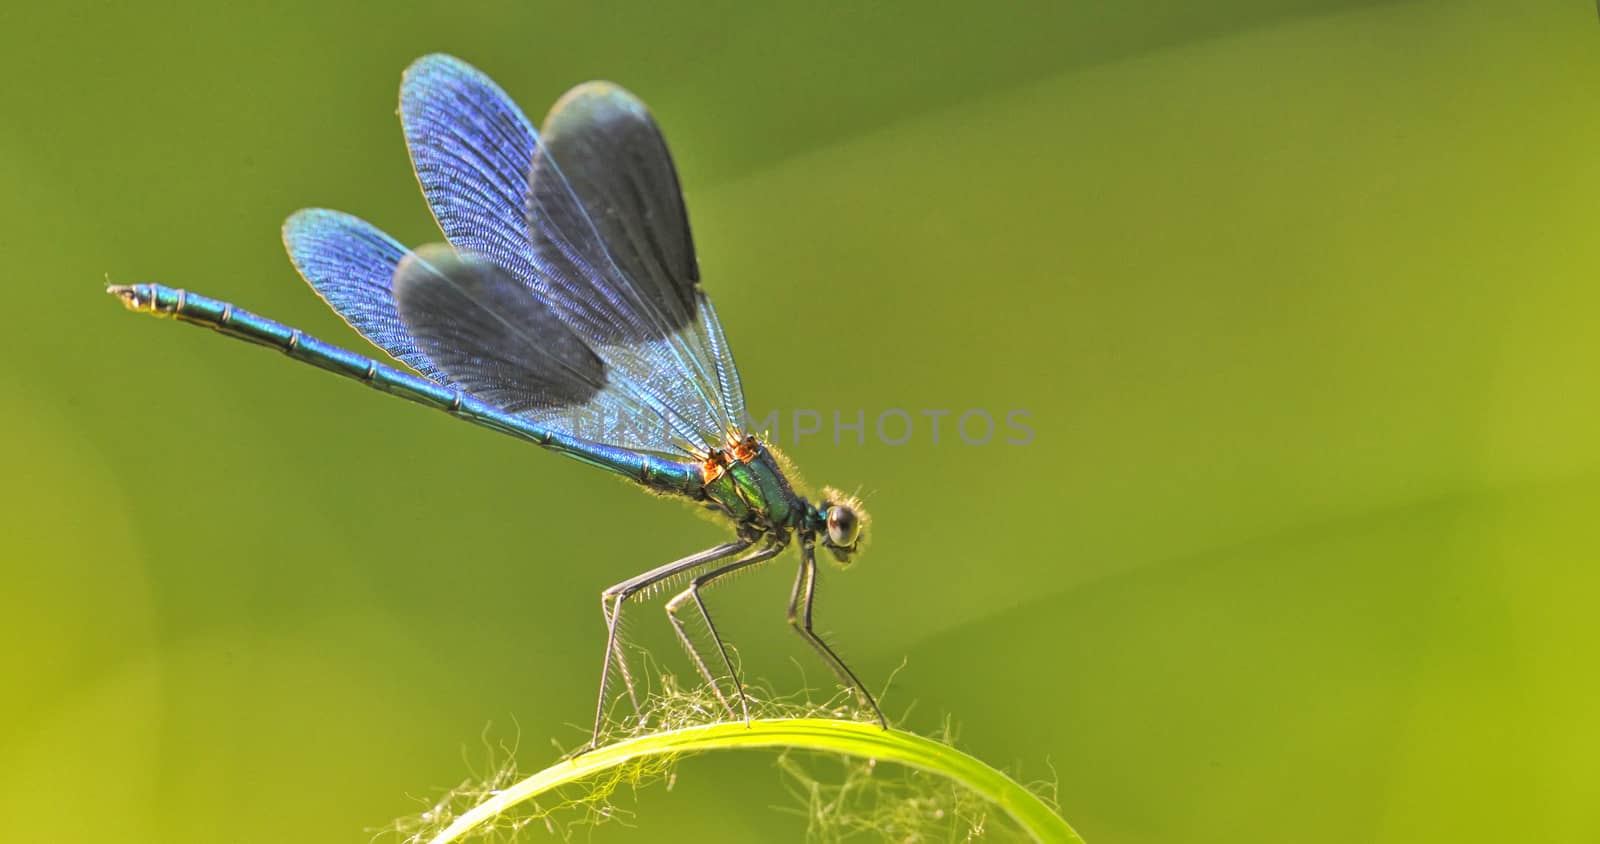 dragon fly on a blade of grass on natural background